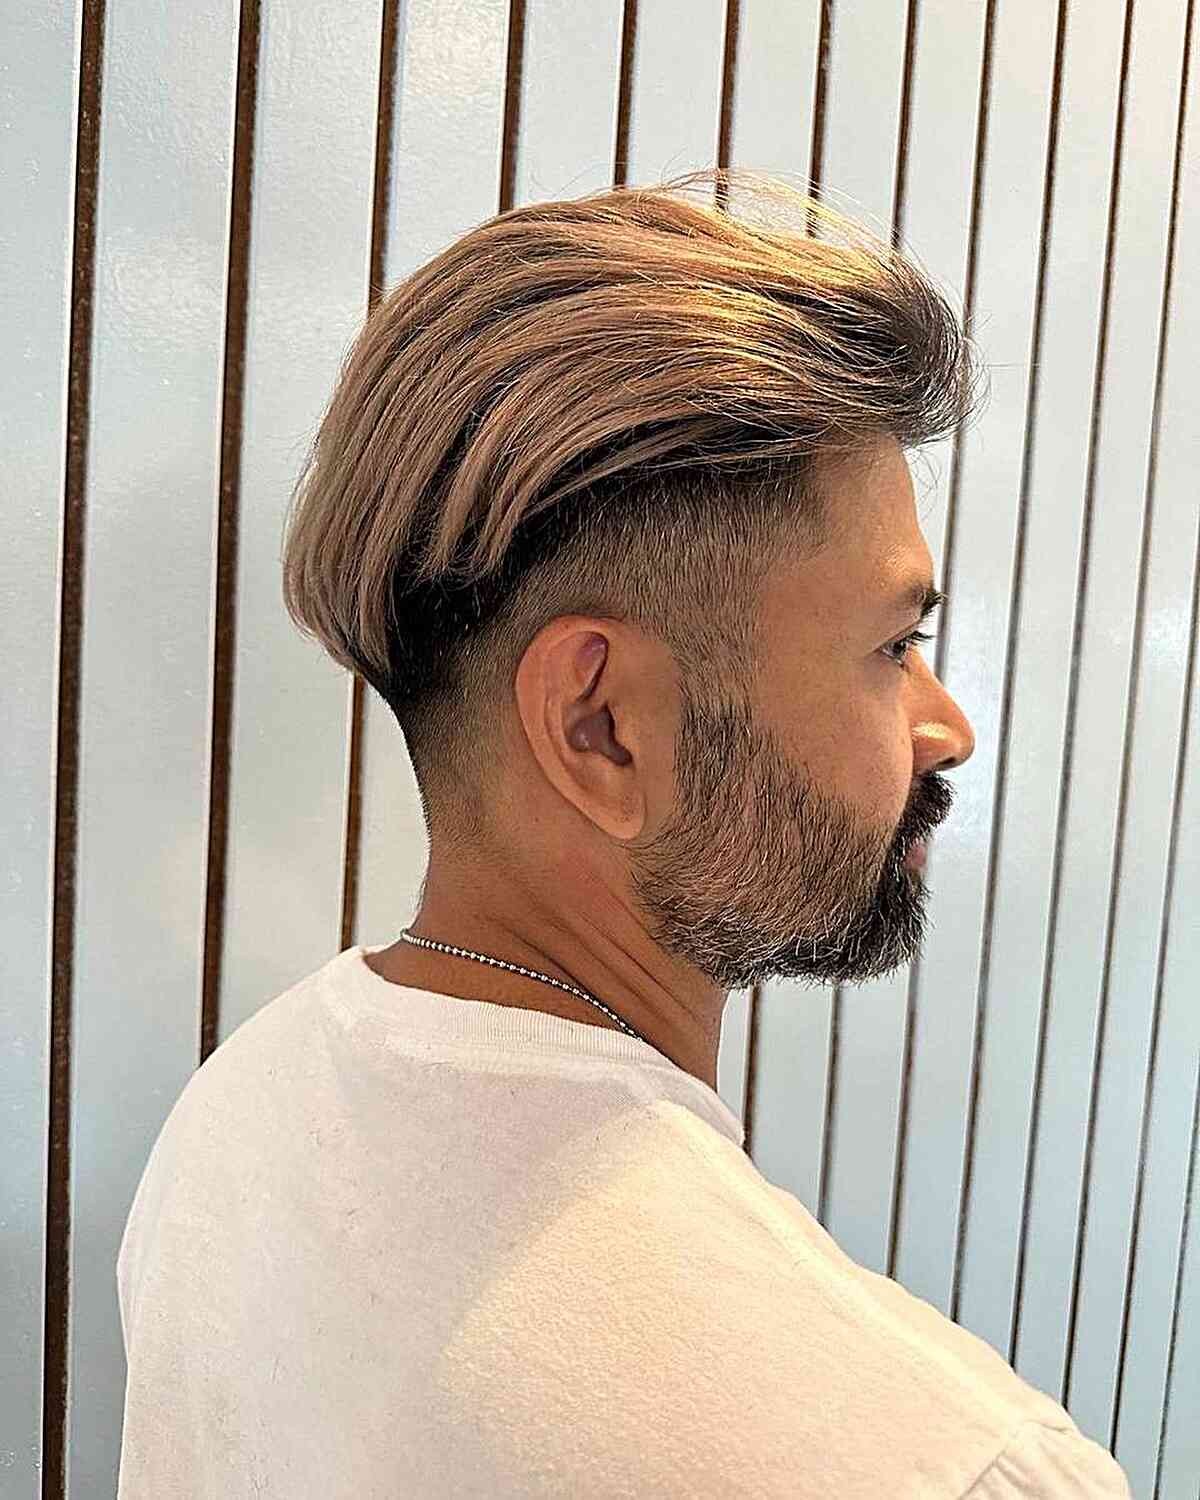 Korean-Inspired Long Slicked Back with Shaved Sides for Men with Beard